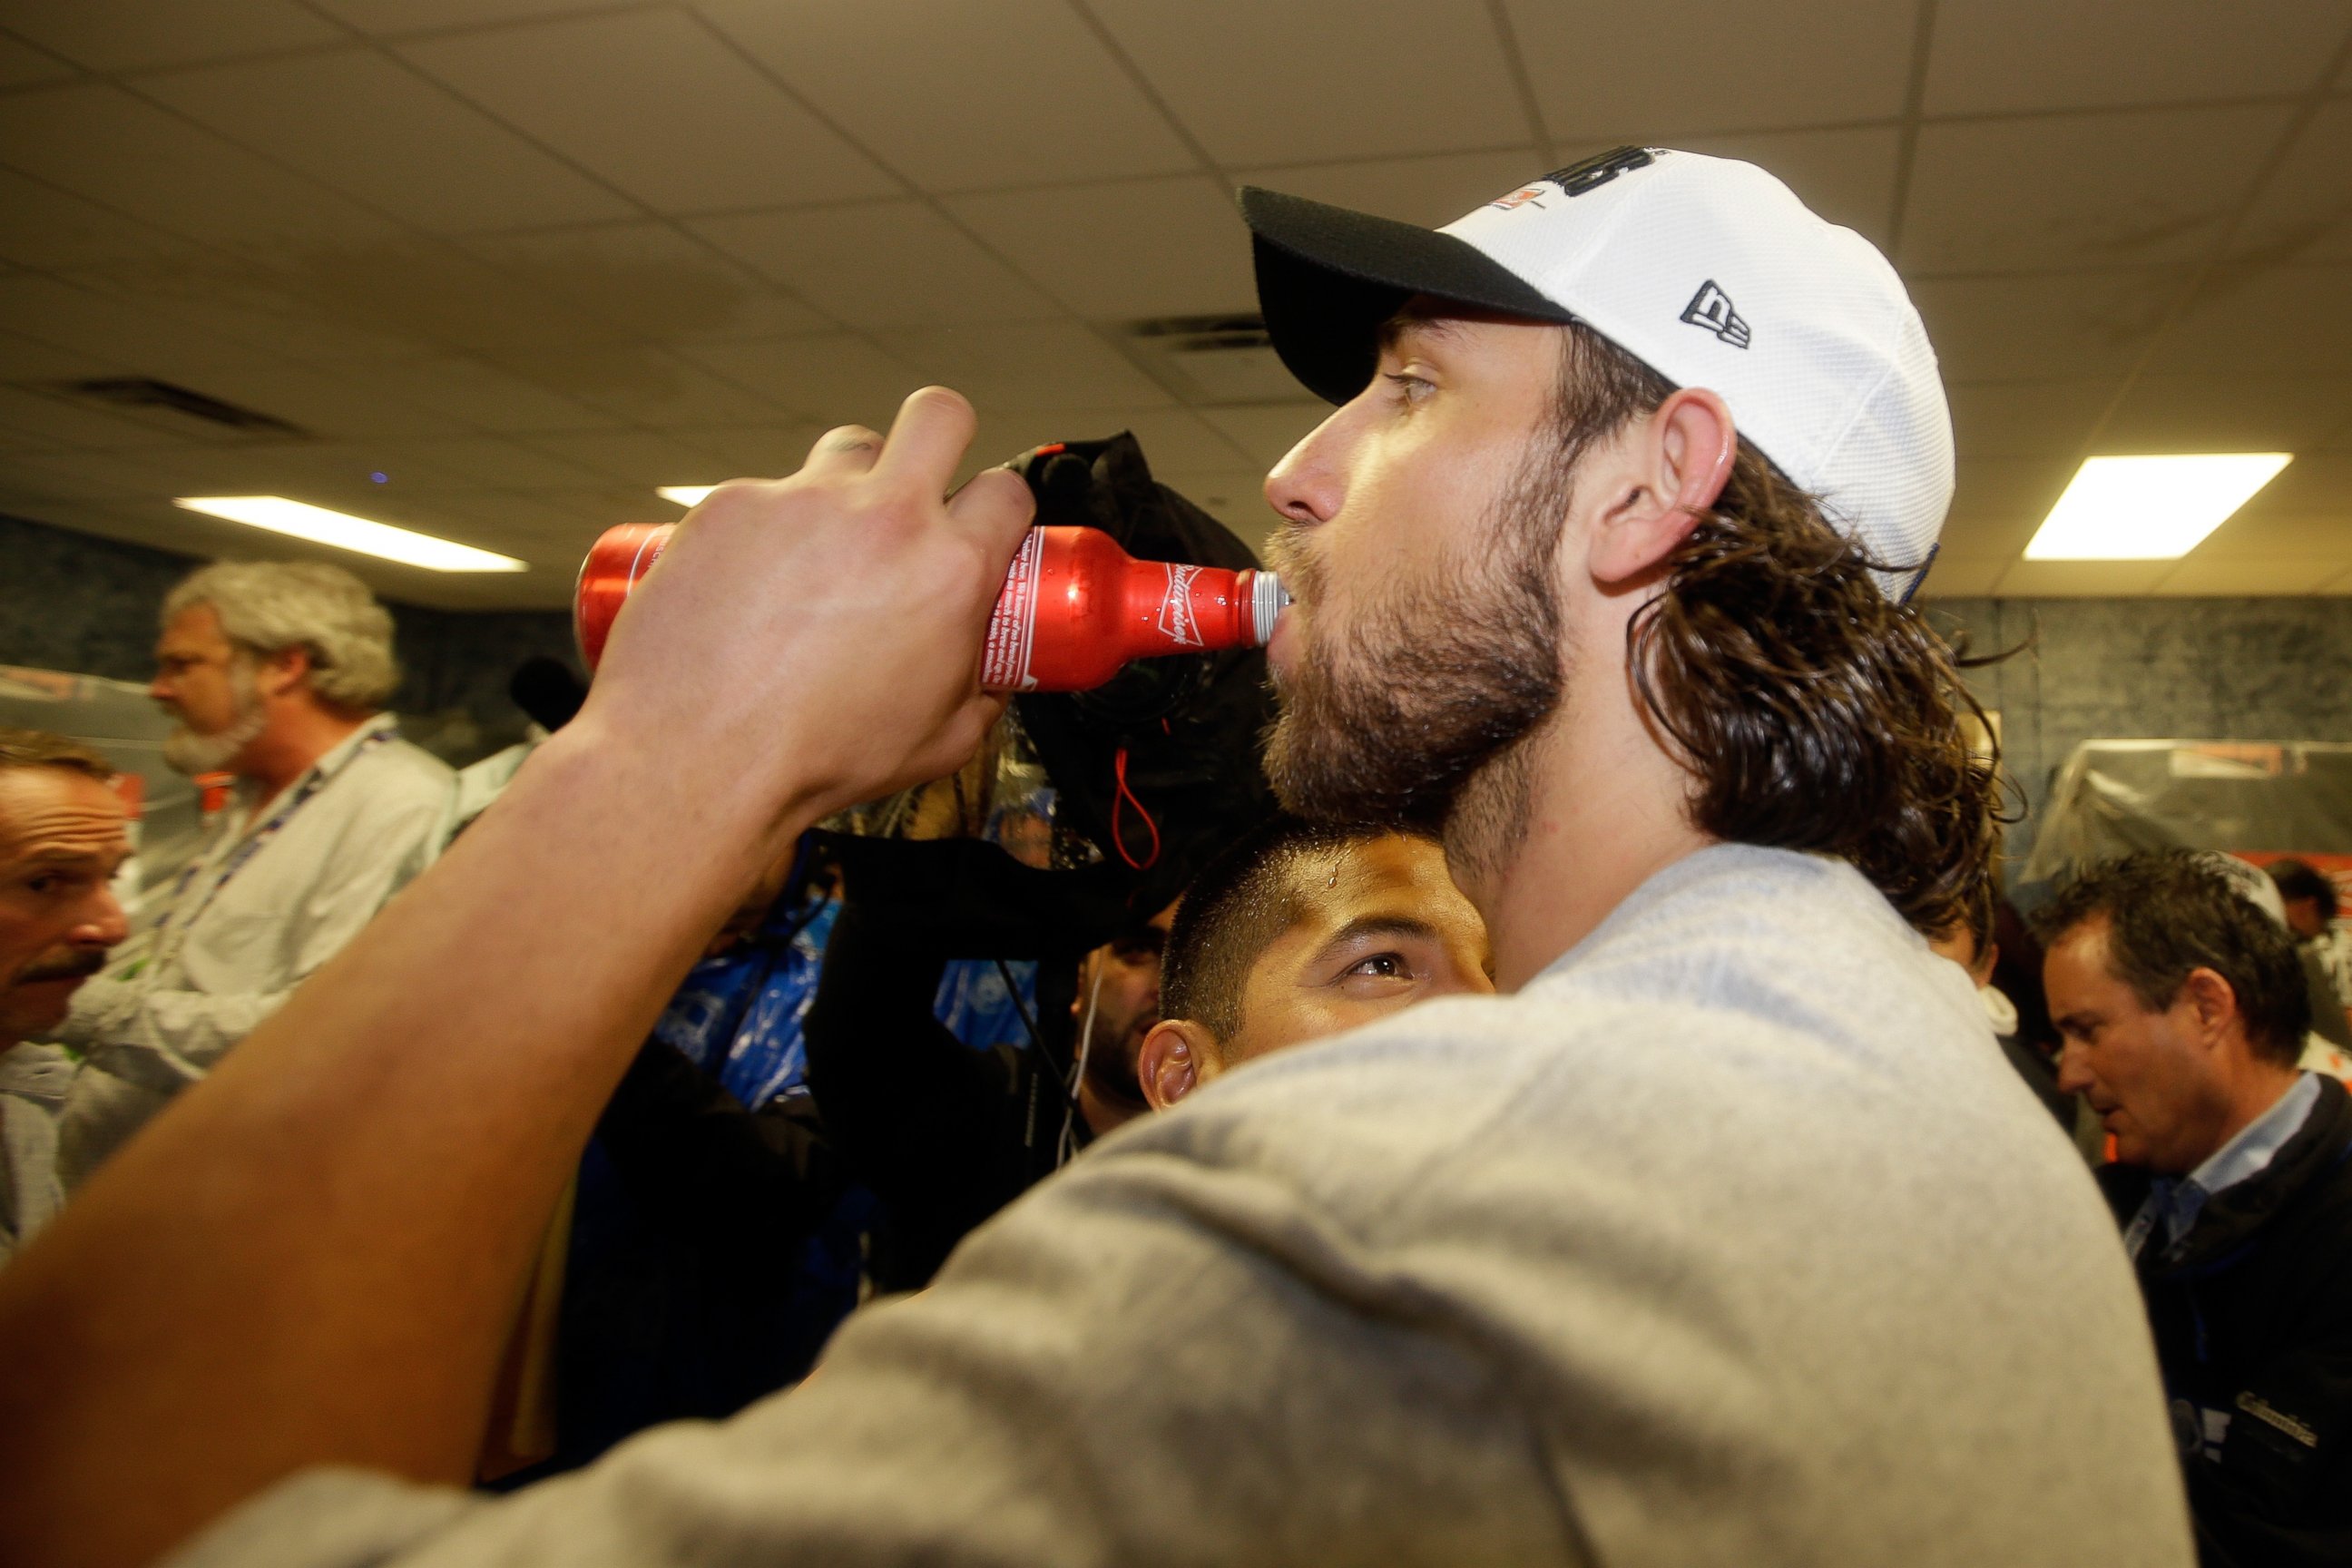 PHOTO: Madison Bumgarner of the San Francisco Giants celebrates in the locker room after defeating the Kansas City Royals during the 2014 World Series on Oct. 29, 2014 in Kansas City, Mo.  